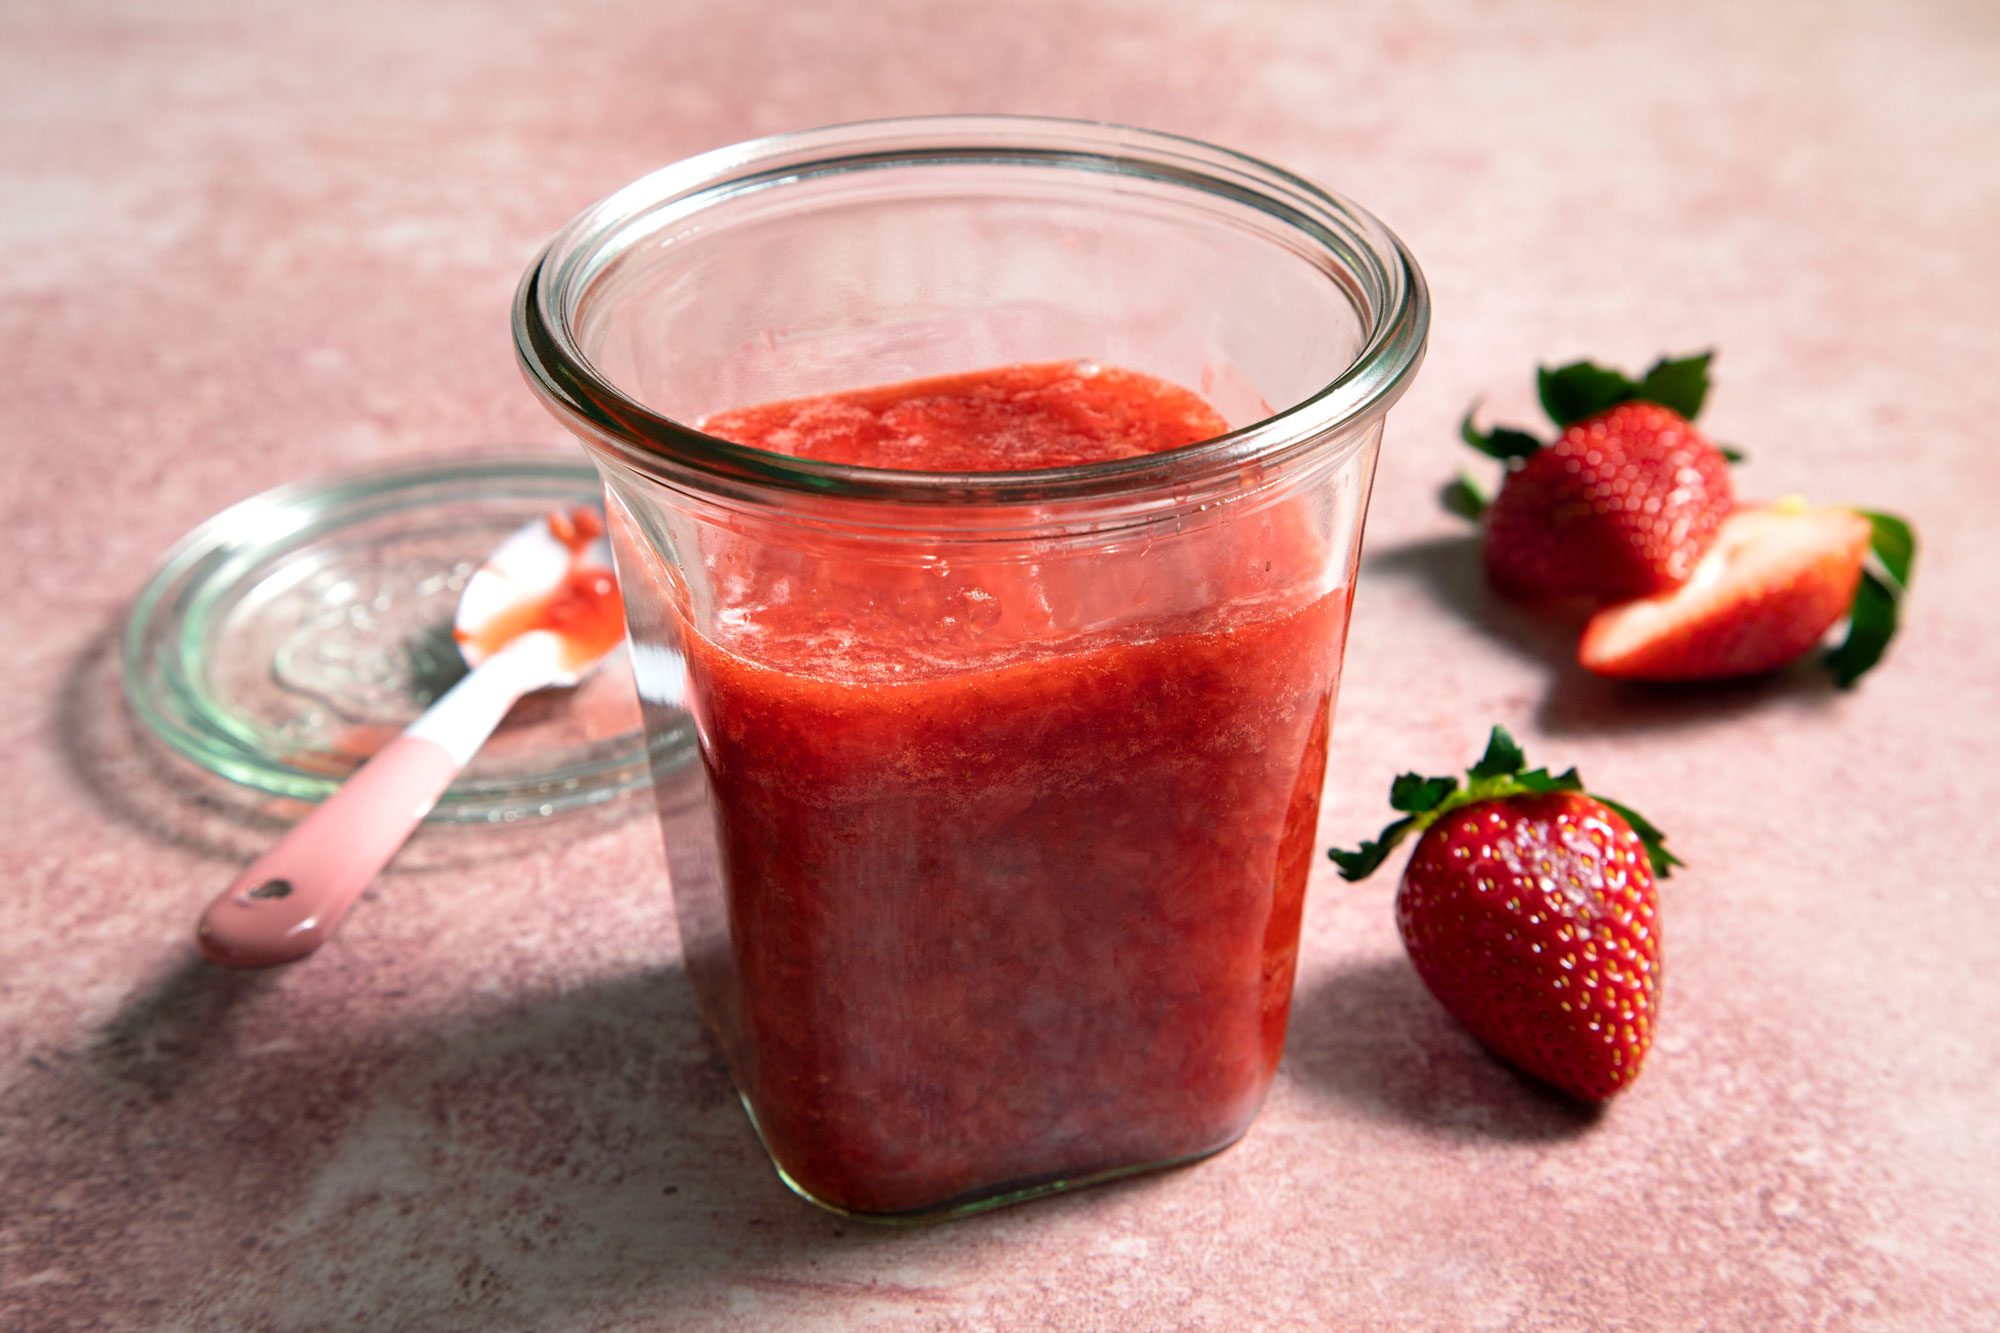 Transfer the cool Strawberry Compote in a jar